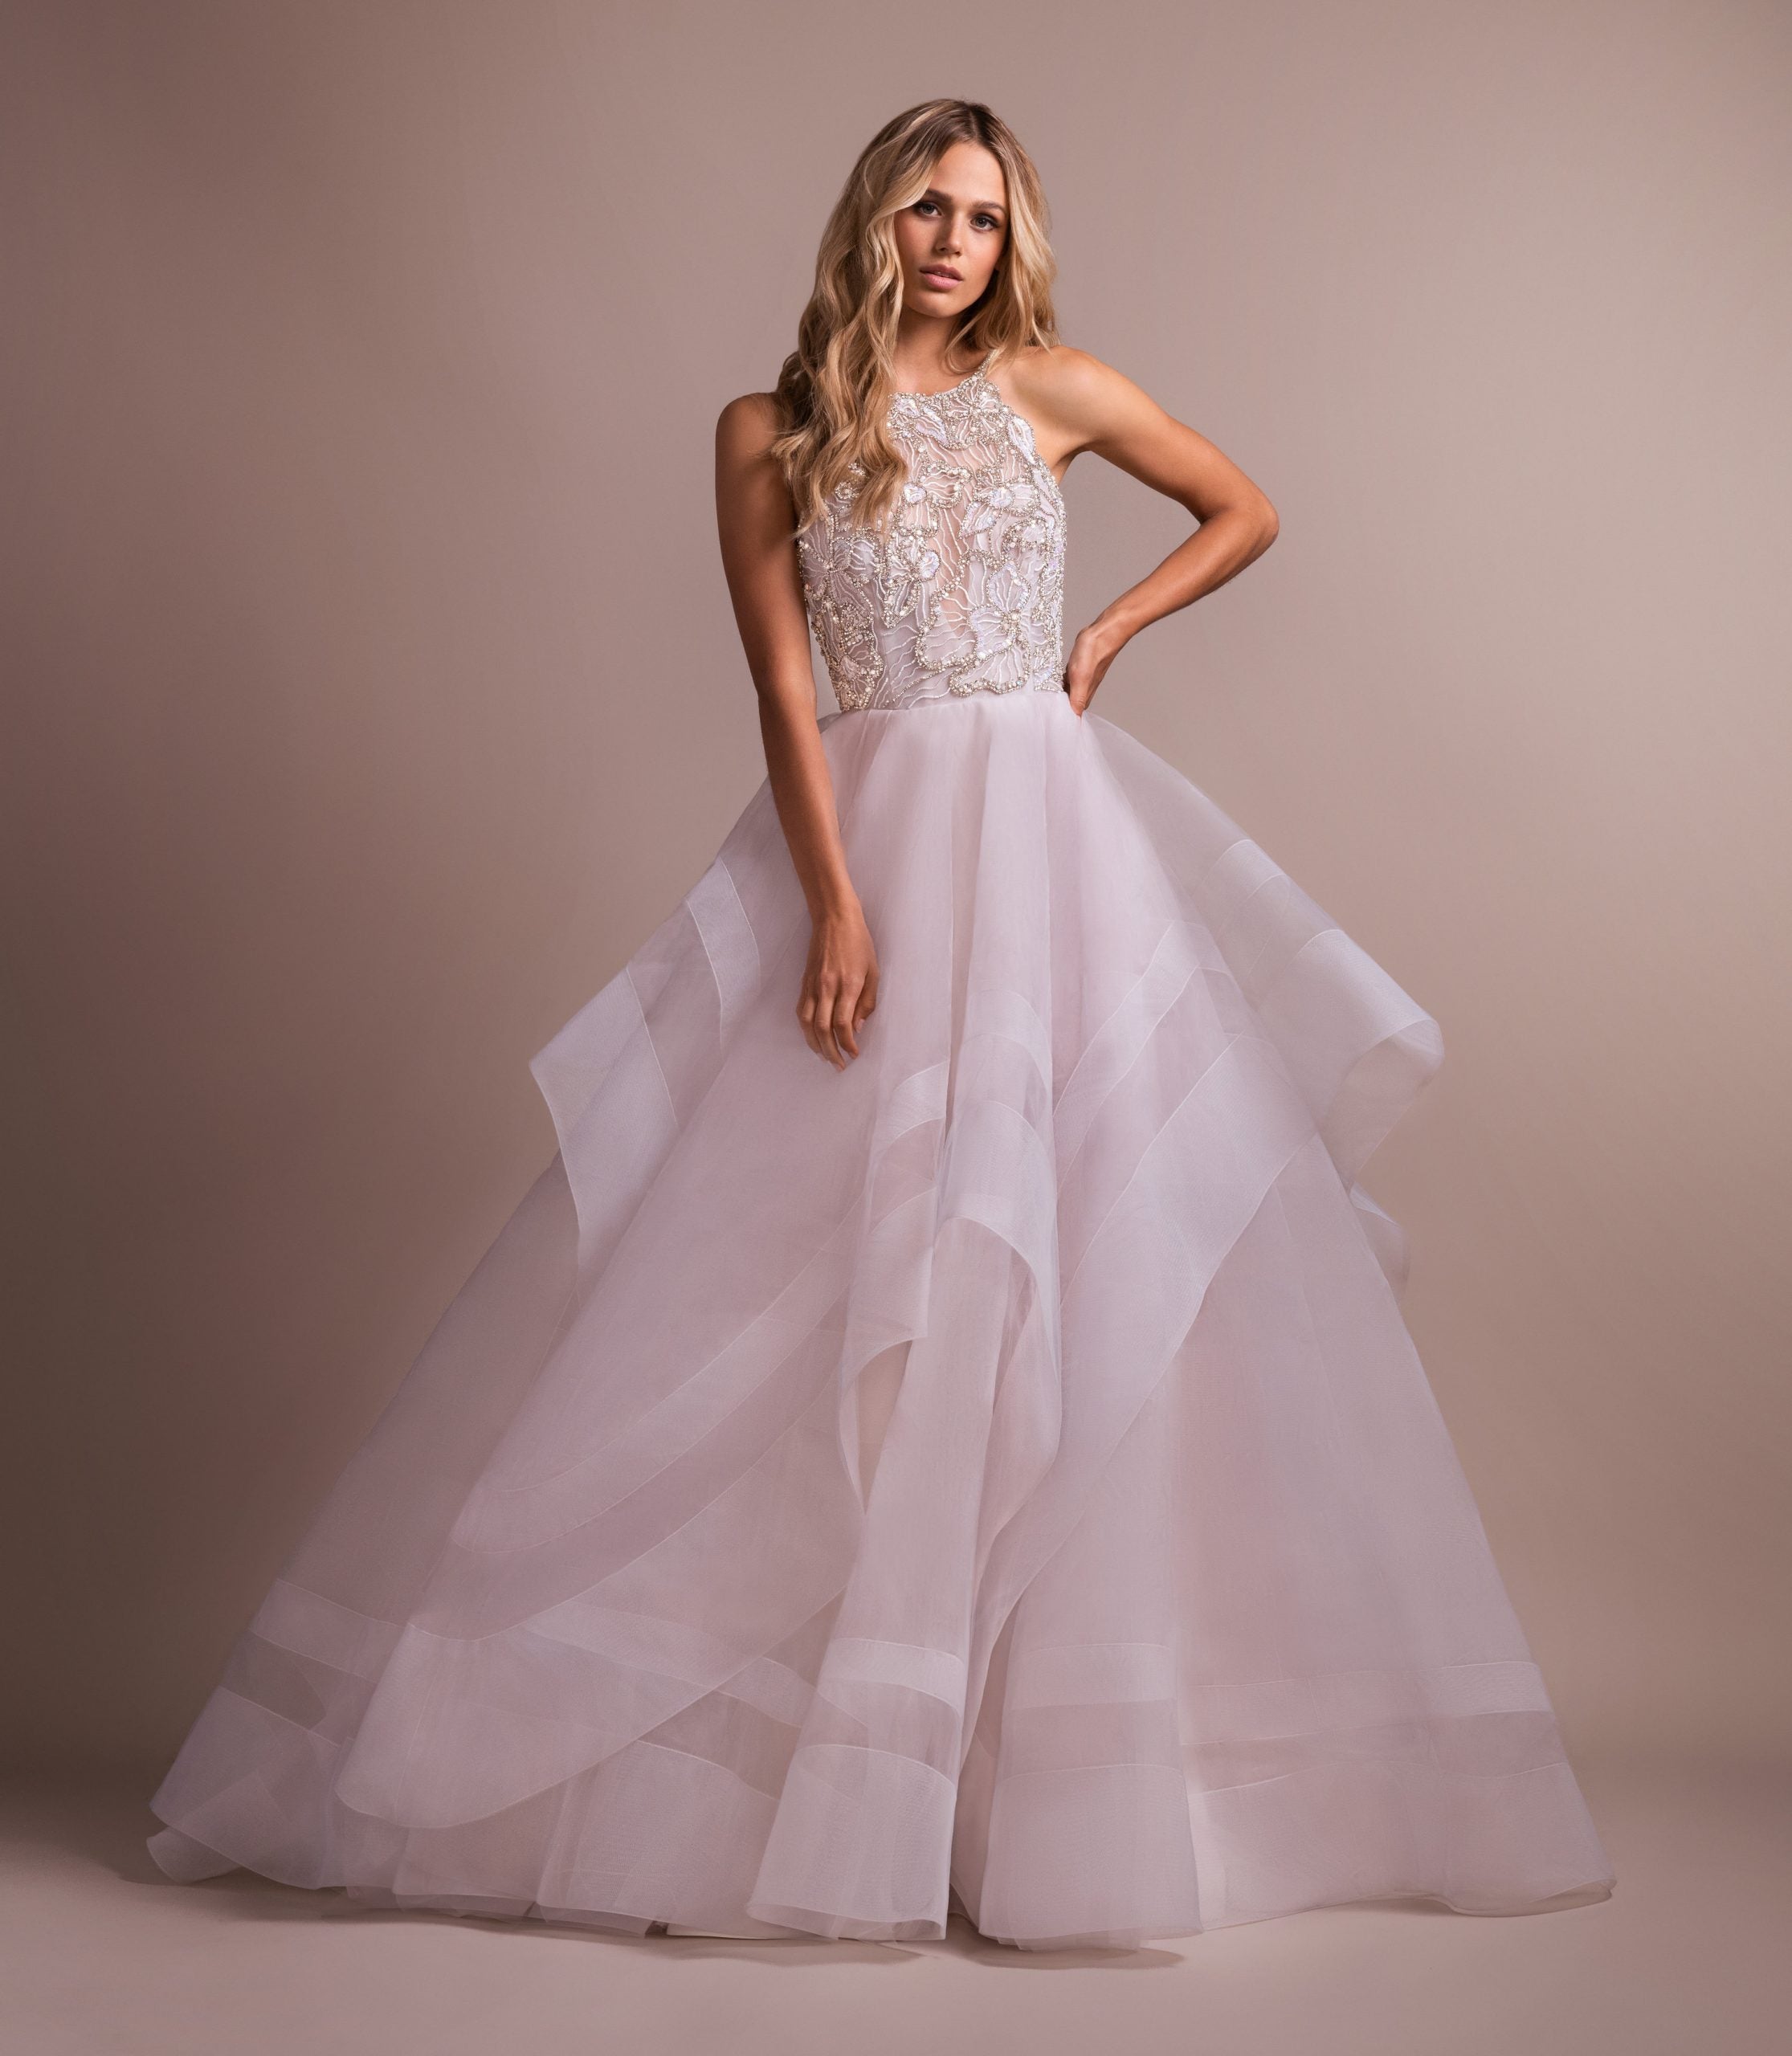 Blush Ball Gown With Horsehair Skirt 